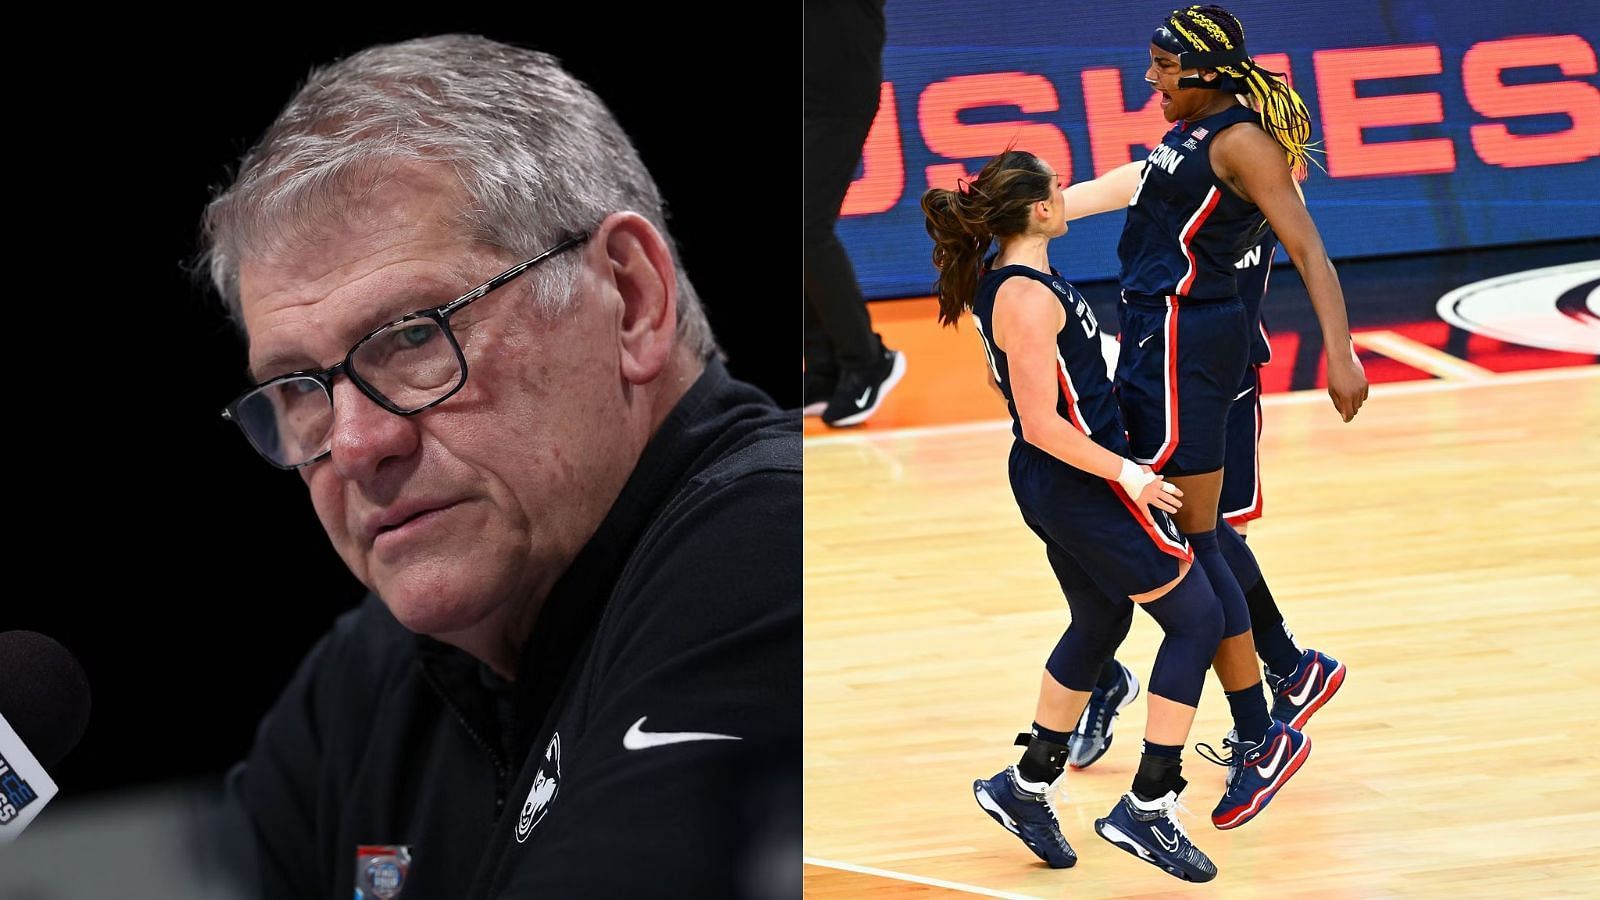 Coach Geno Auriemma is sending two more Huskies into the WNBA with likely draft picks Aaliyah Edwards and Nika Muhl.